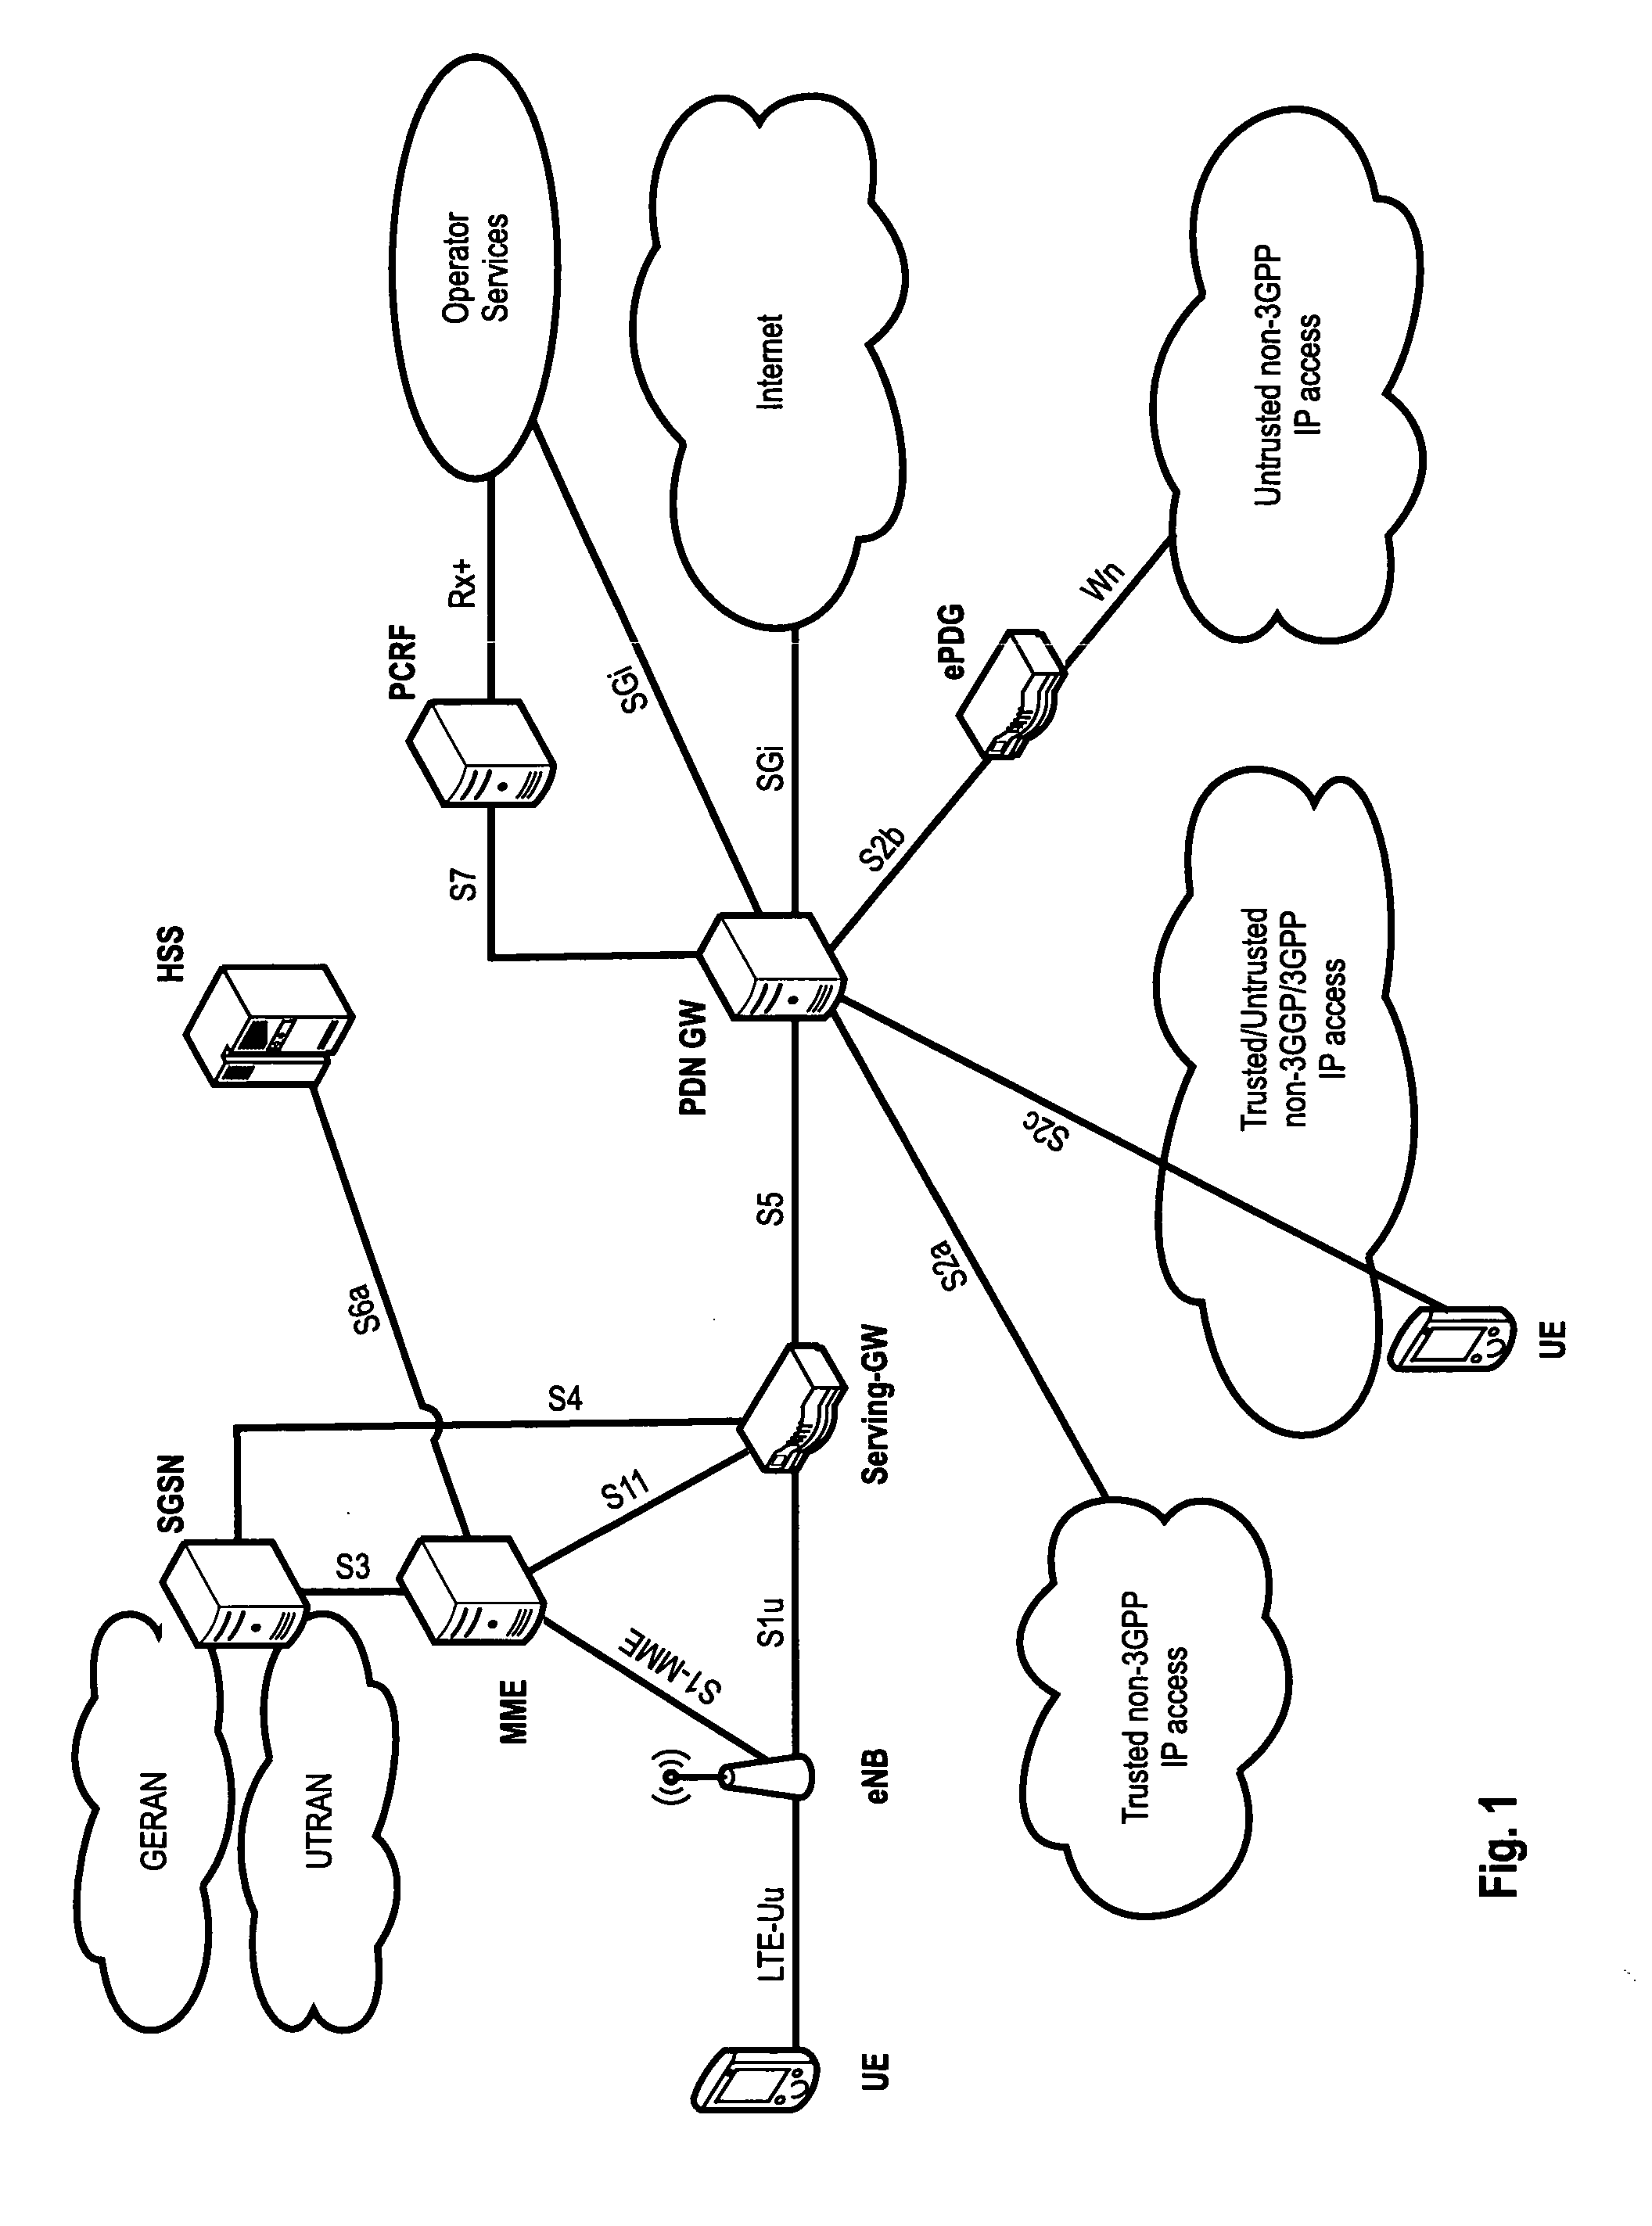 Component carrier activation and deactivation using resource assignments